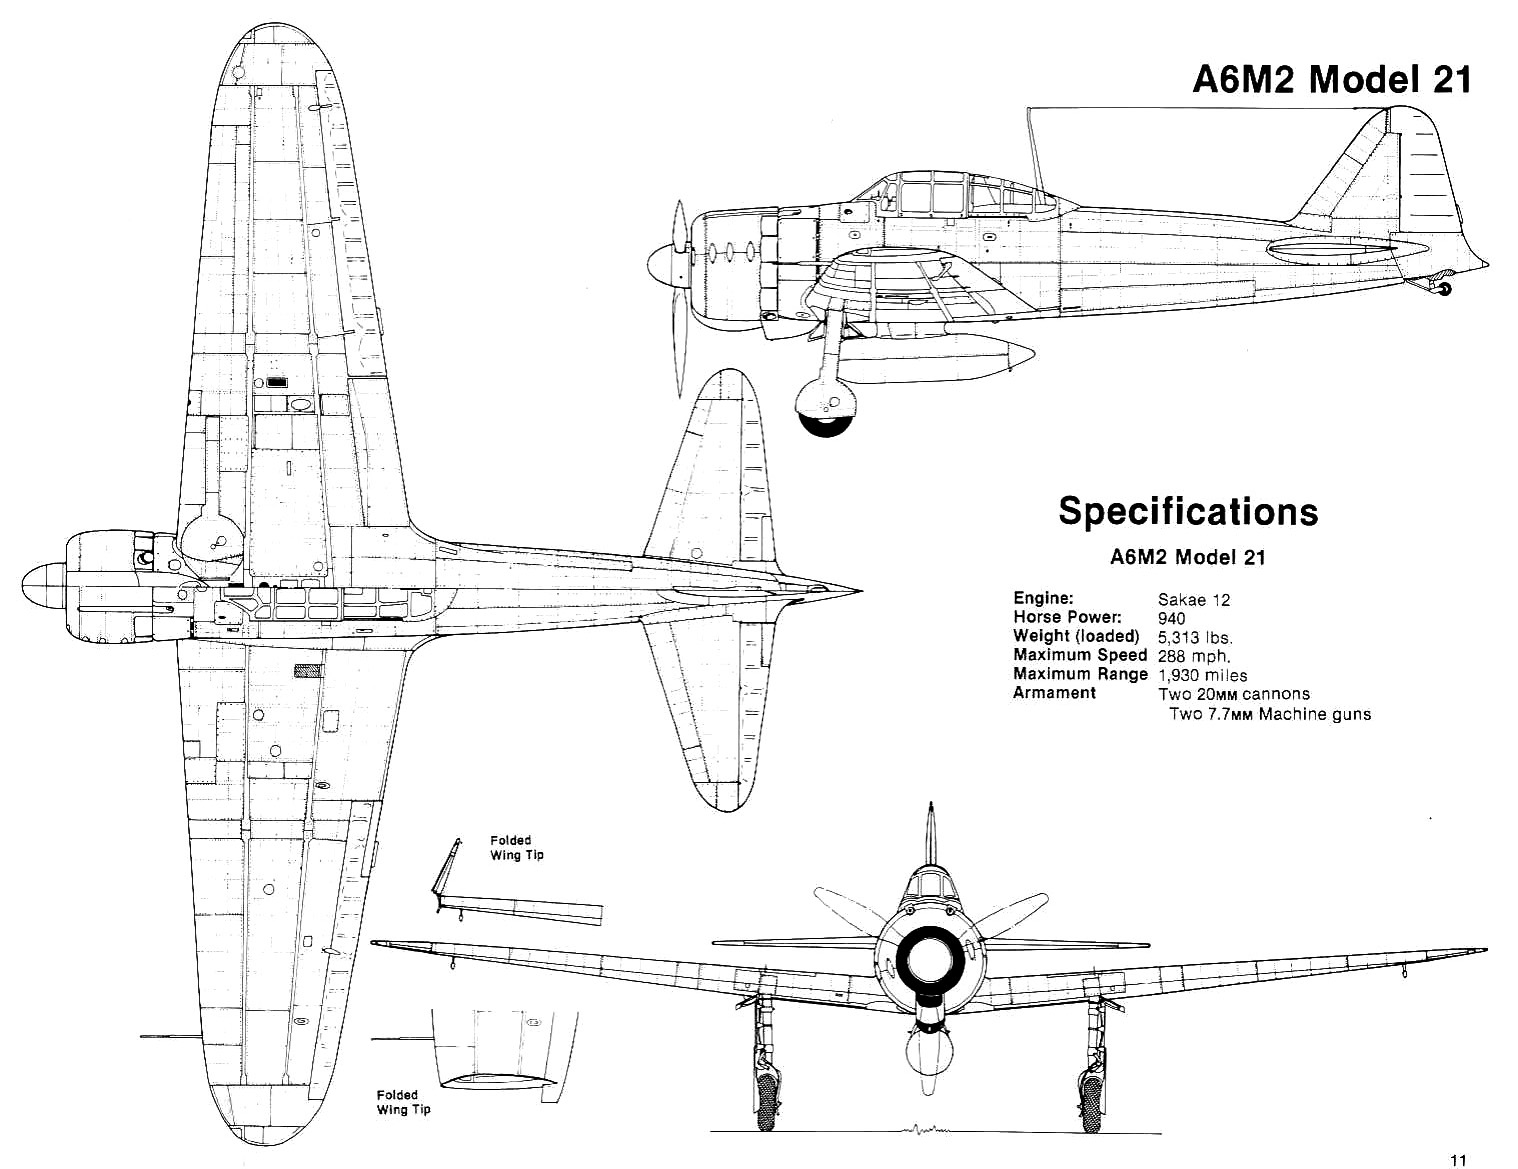 The Mitsubishi A6M Zero was a long-extend warrior flying machine managed by the Imperial Japanese Navy Air Service from 1940 to 1945. The A6M was designated as the Mitsubishi Navy […]